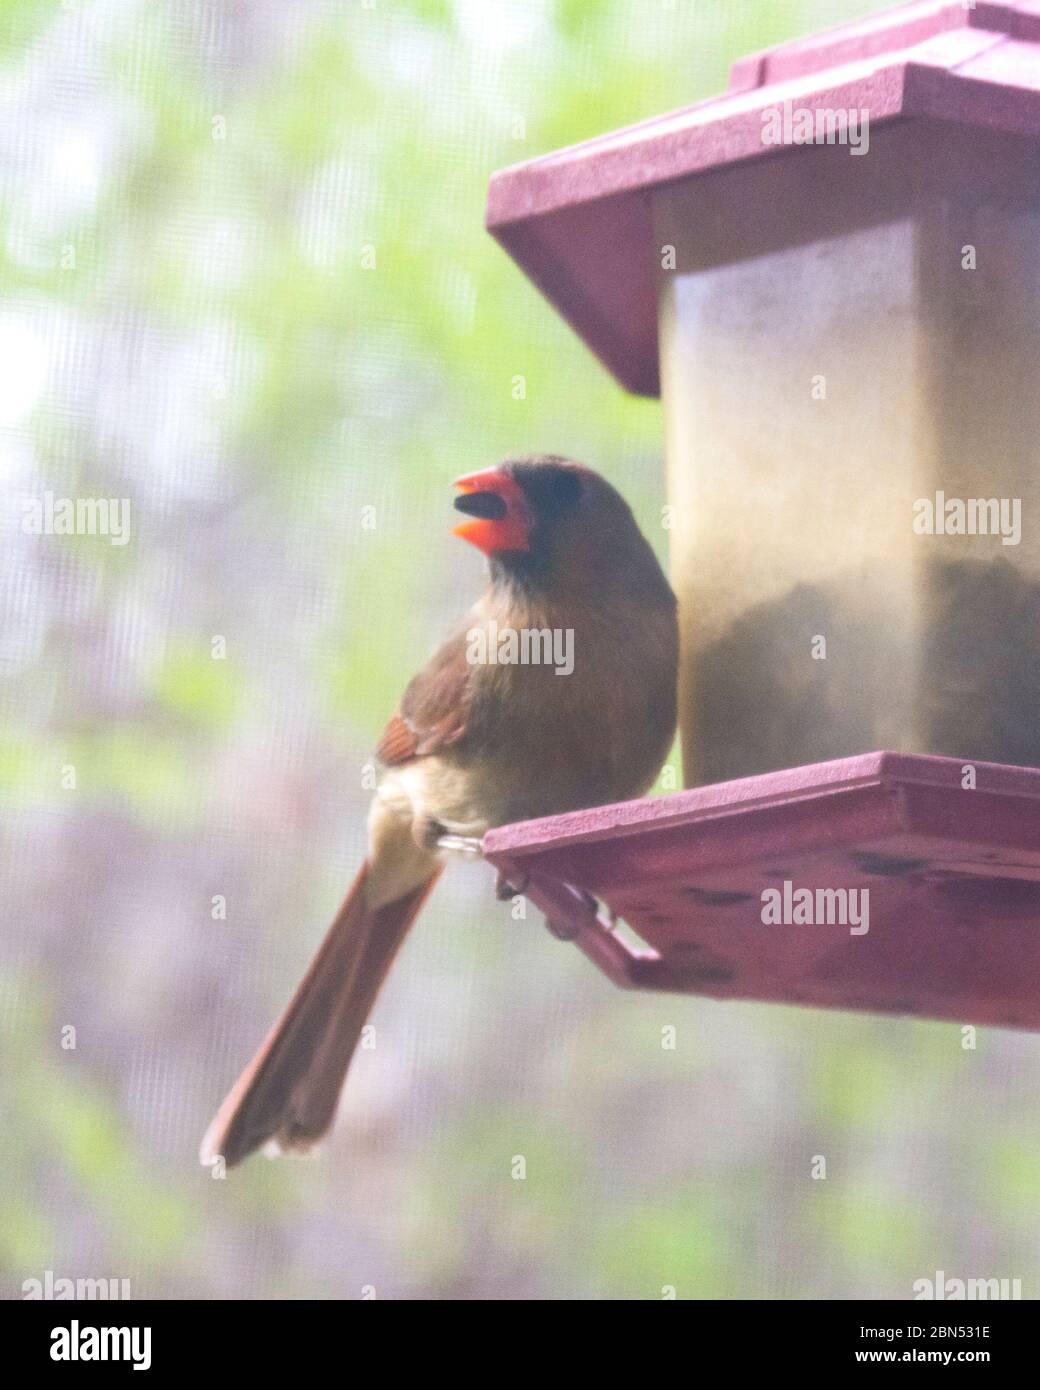 A female cardinal perched at a bird feeder in the spring.  Eating a sunflower seed.  Background blurred. Stock Photo